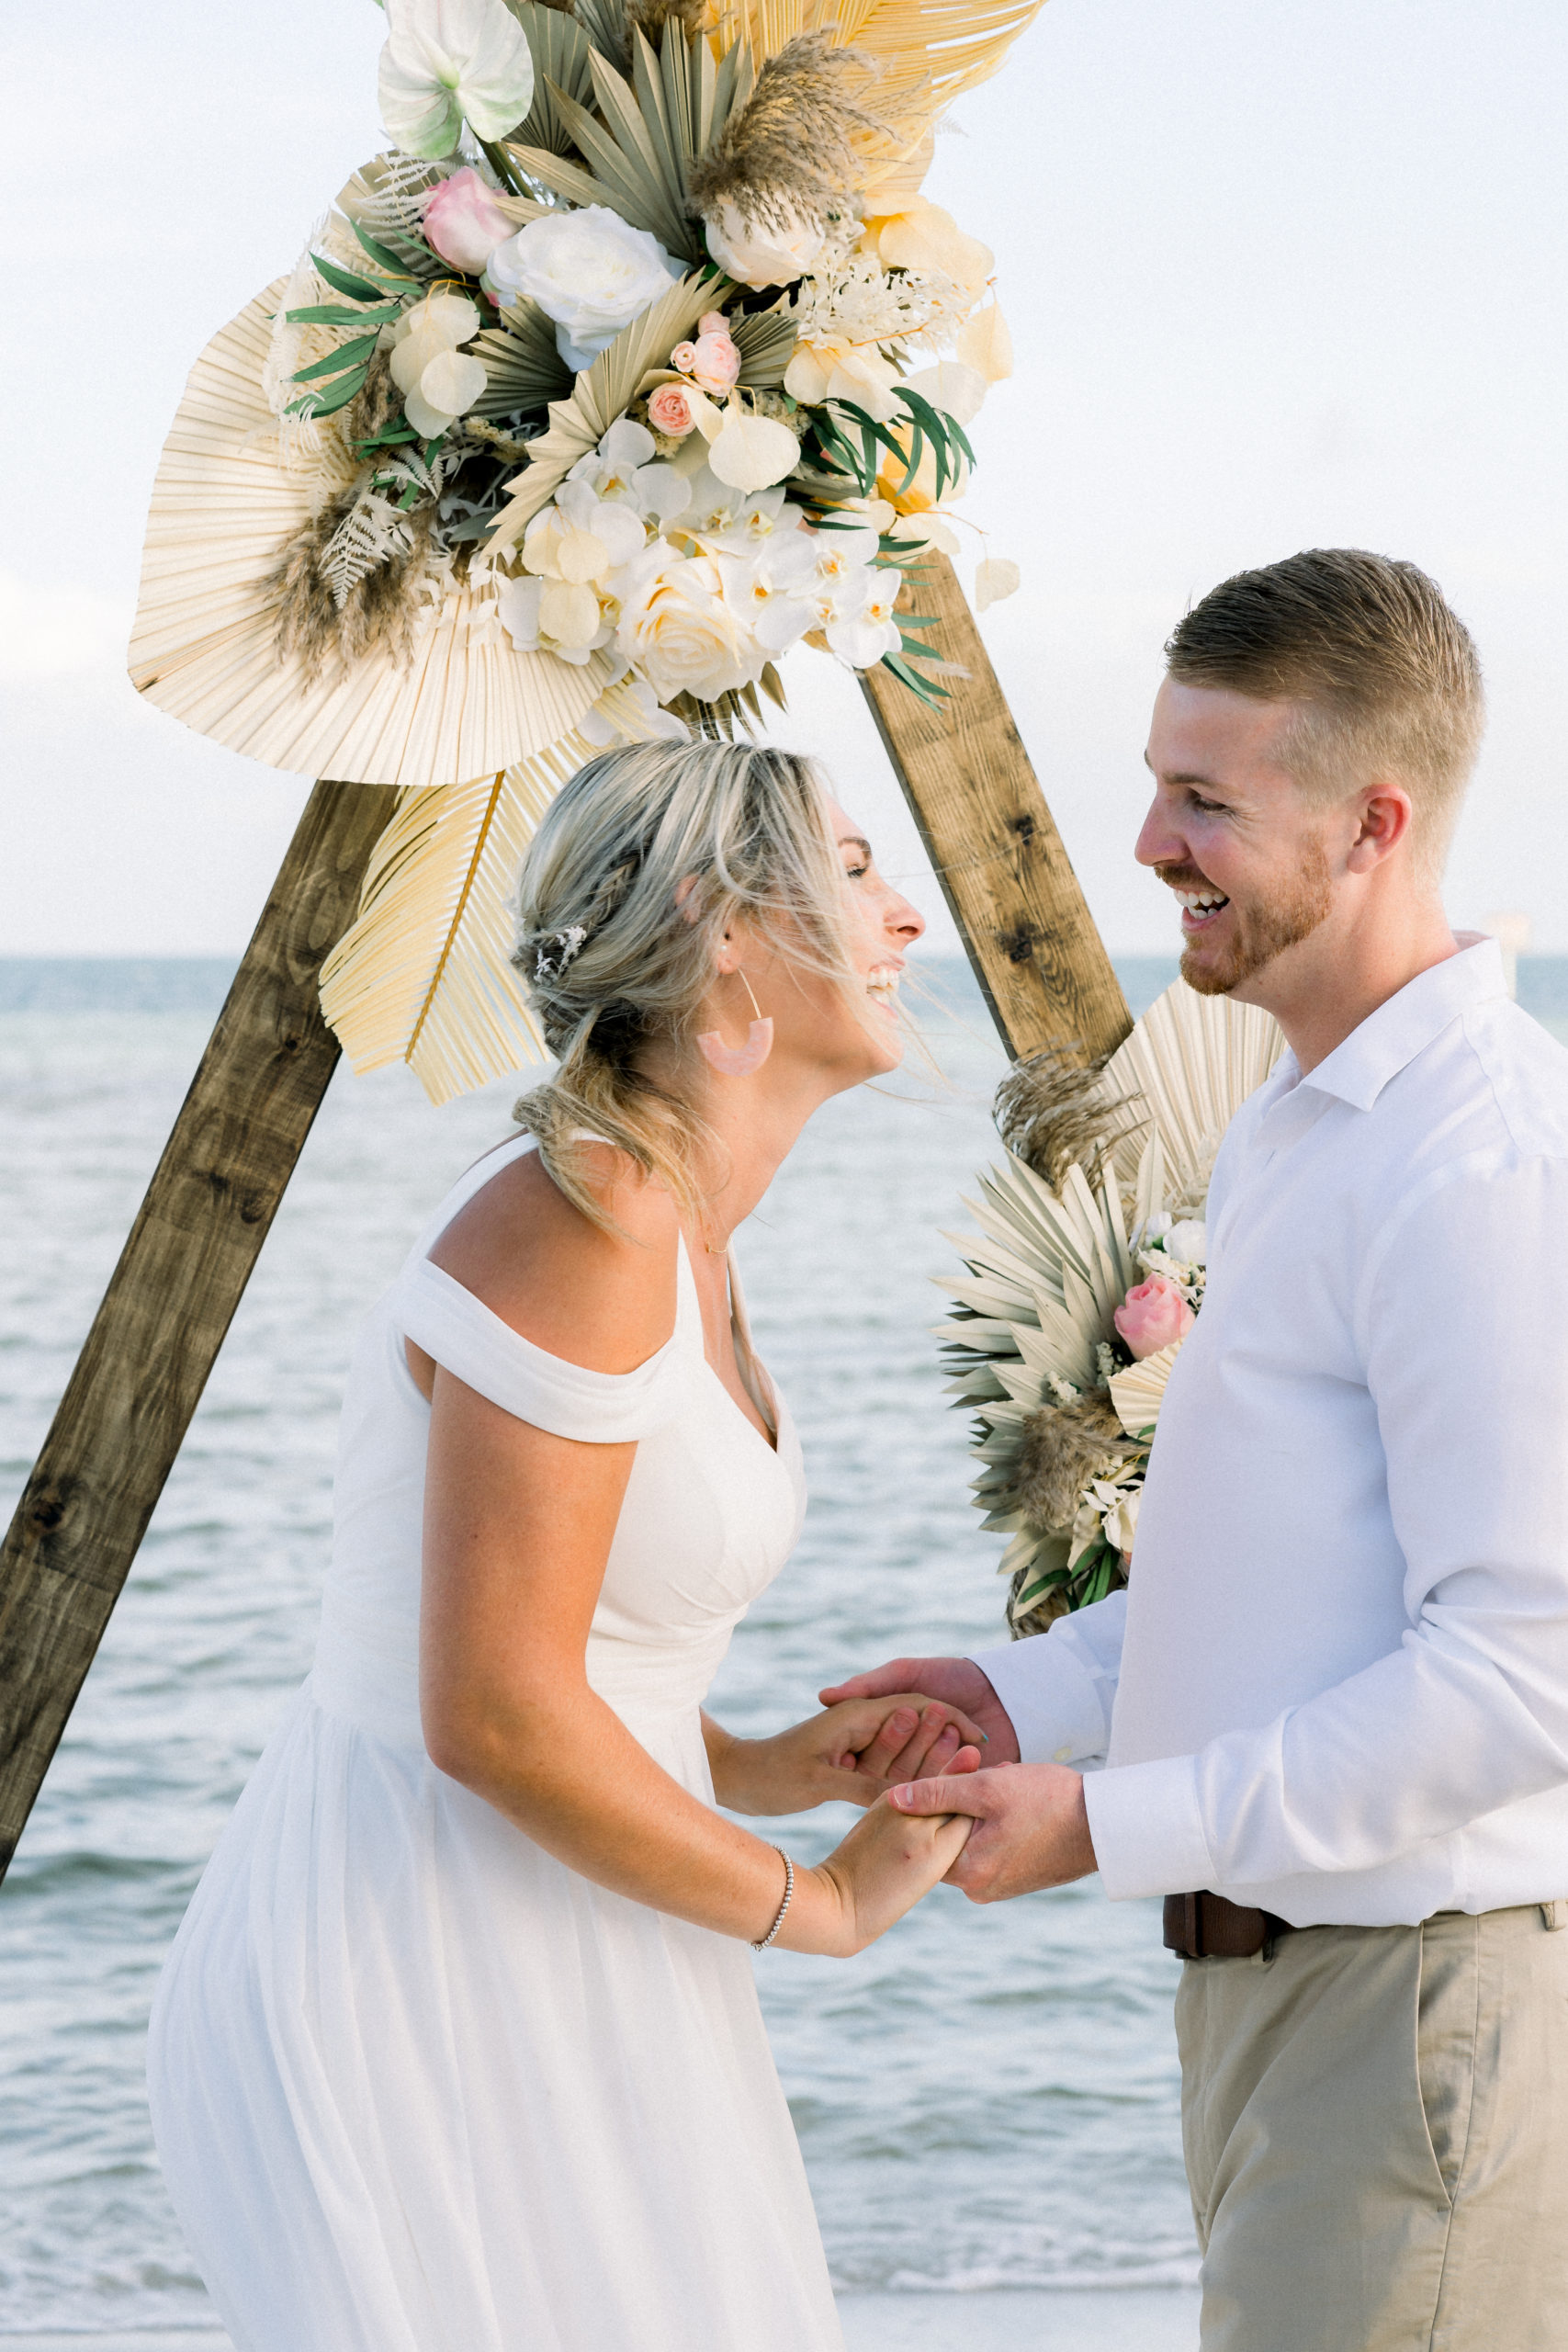 A couple having an intimate beach elopement ceremony, smiling at each other.